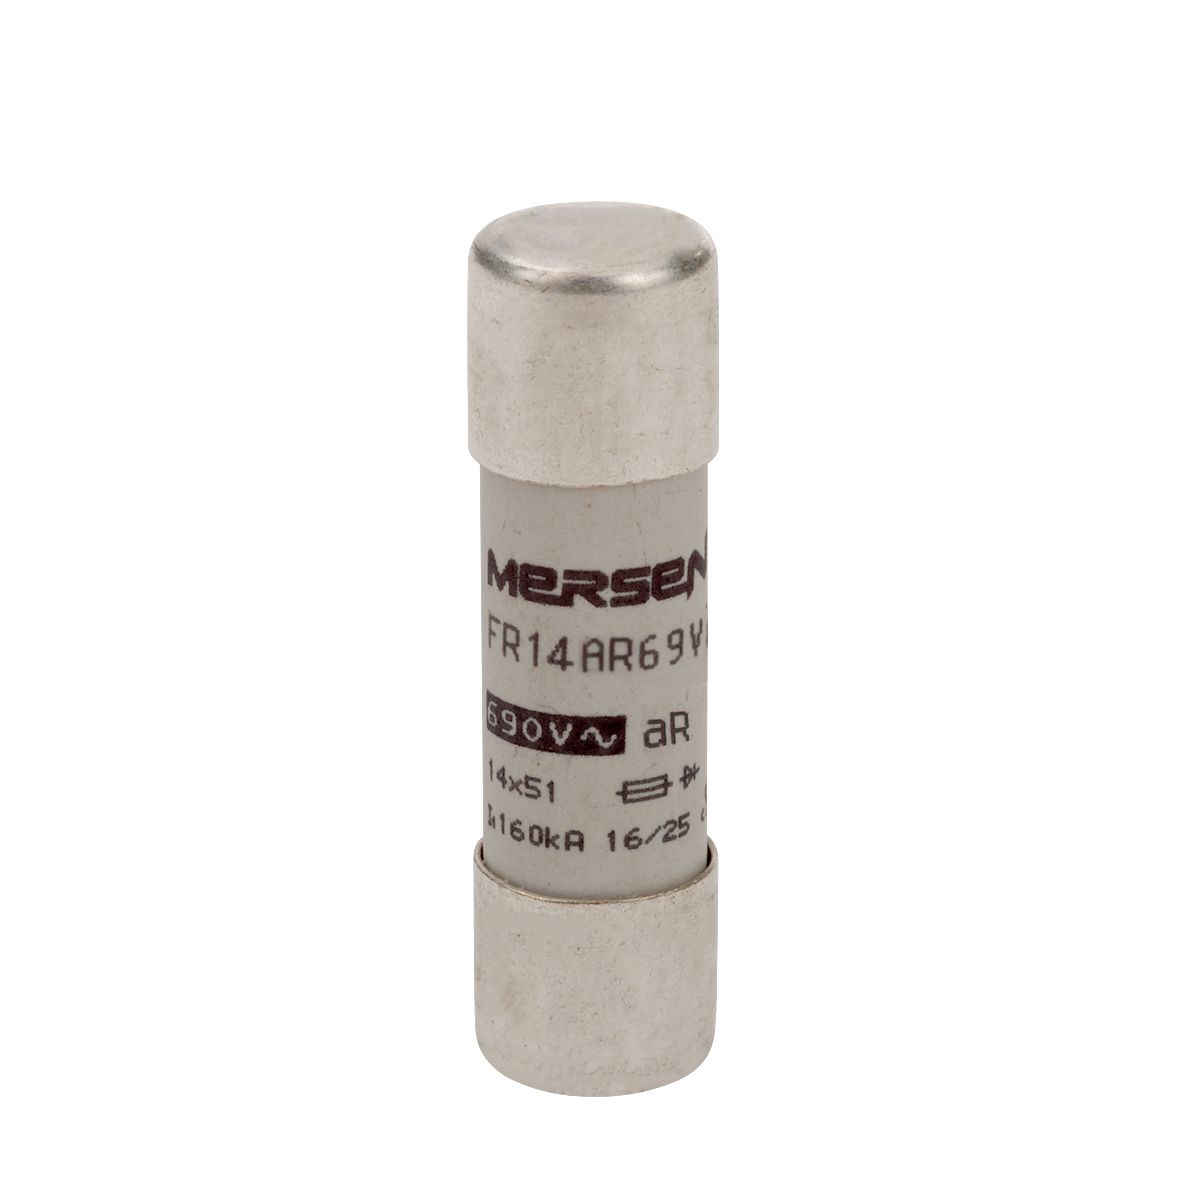 N1027330 - Cylindrical fuse-link aR 690VAC 14x51, 20A, without indicator